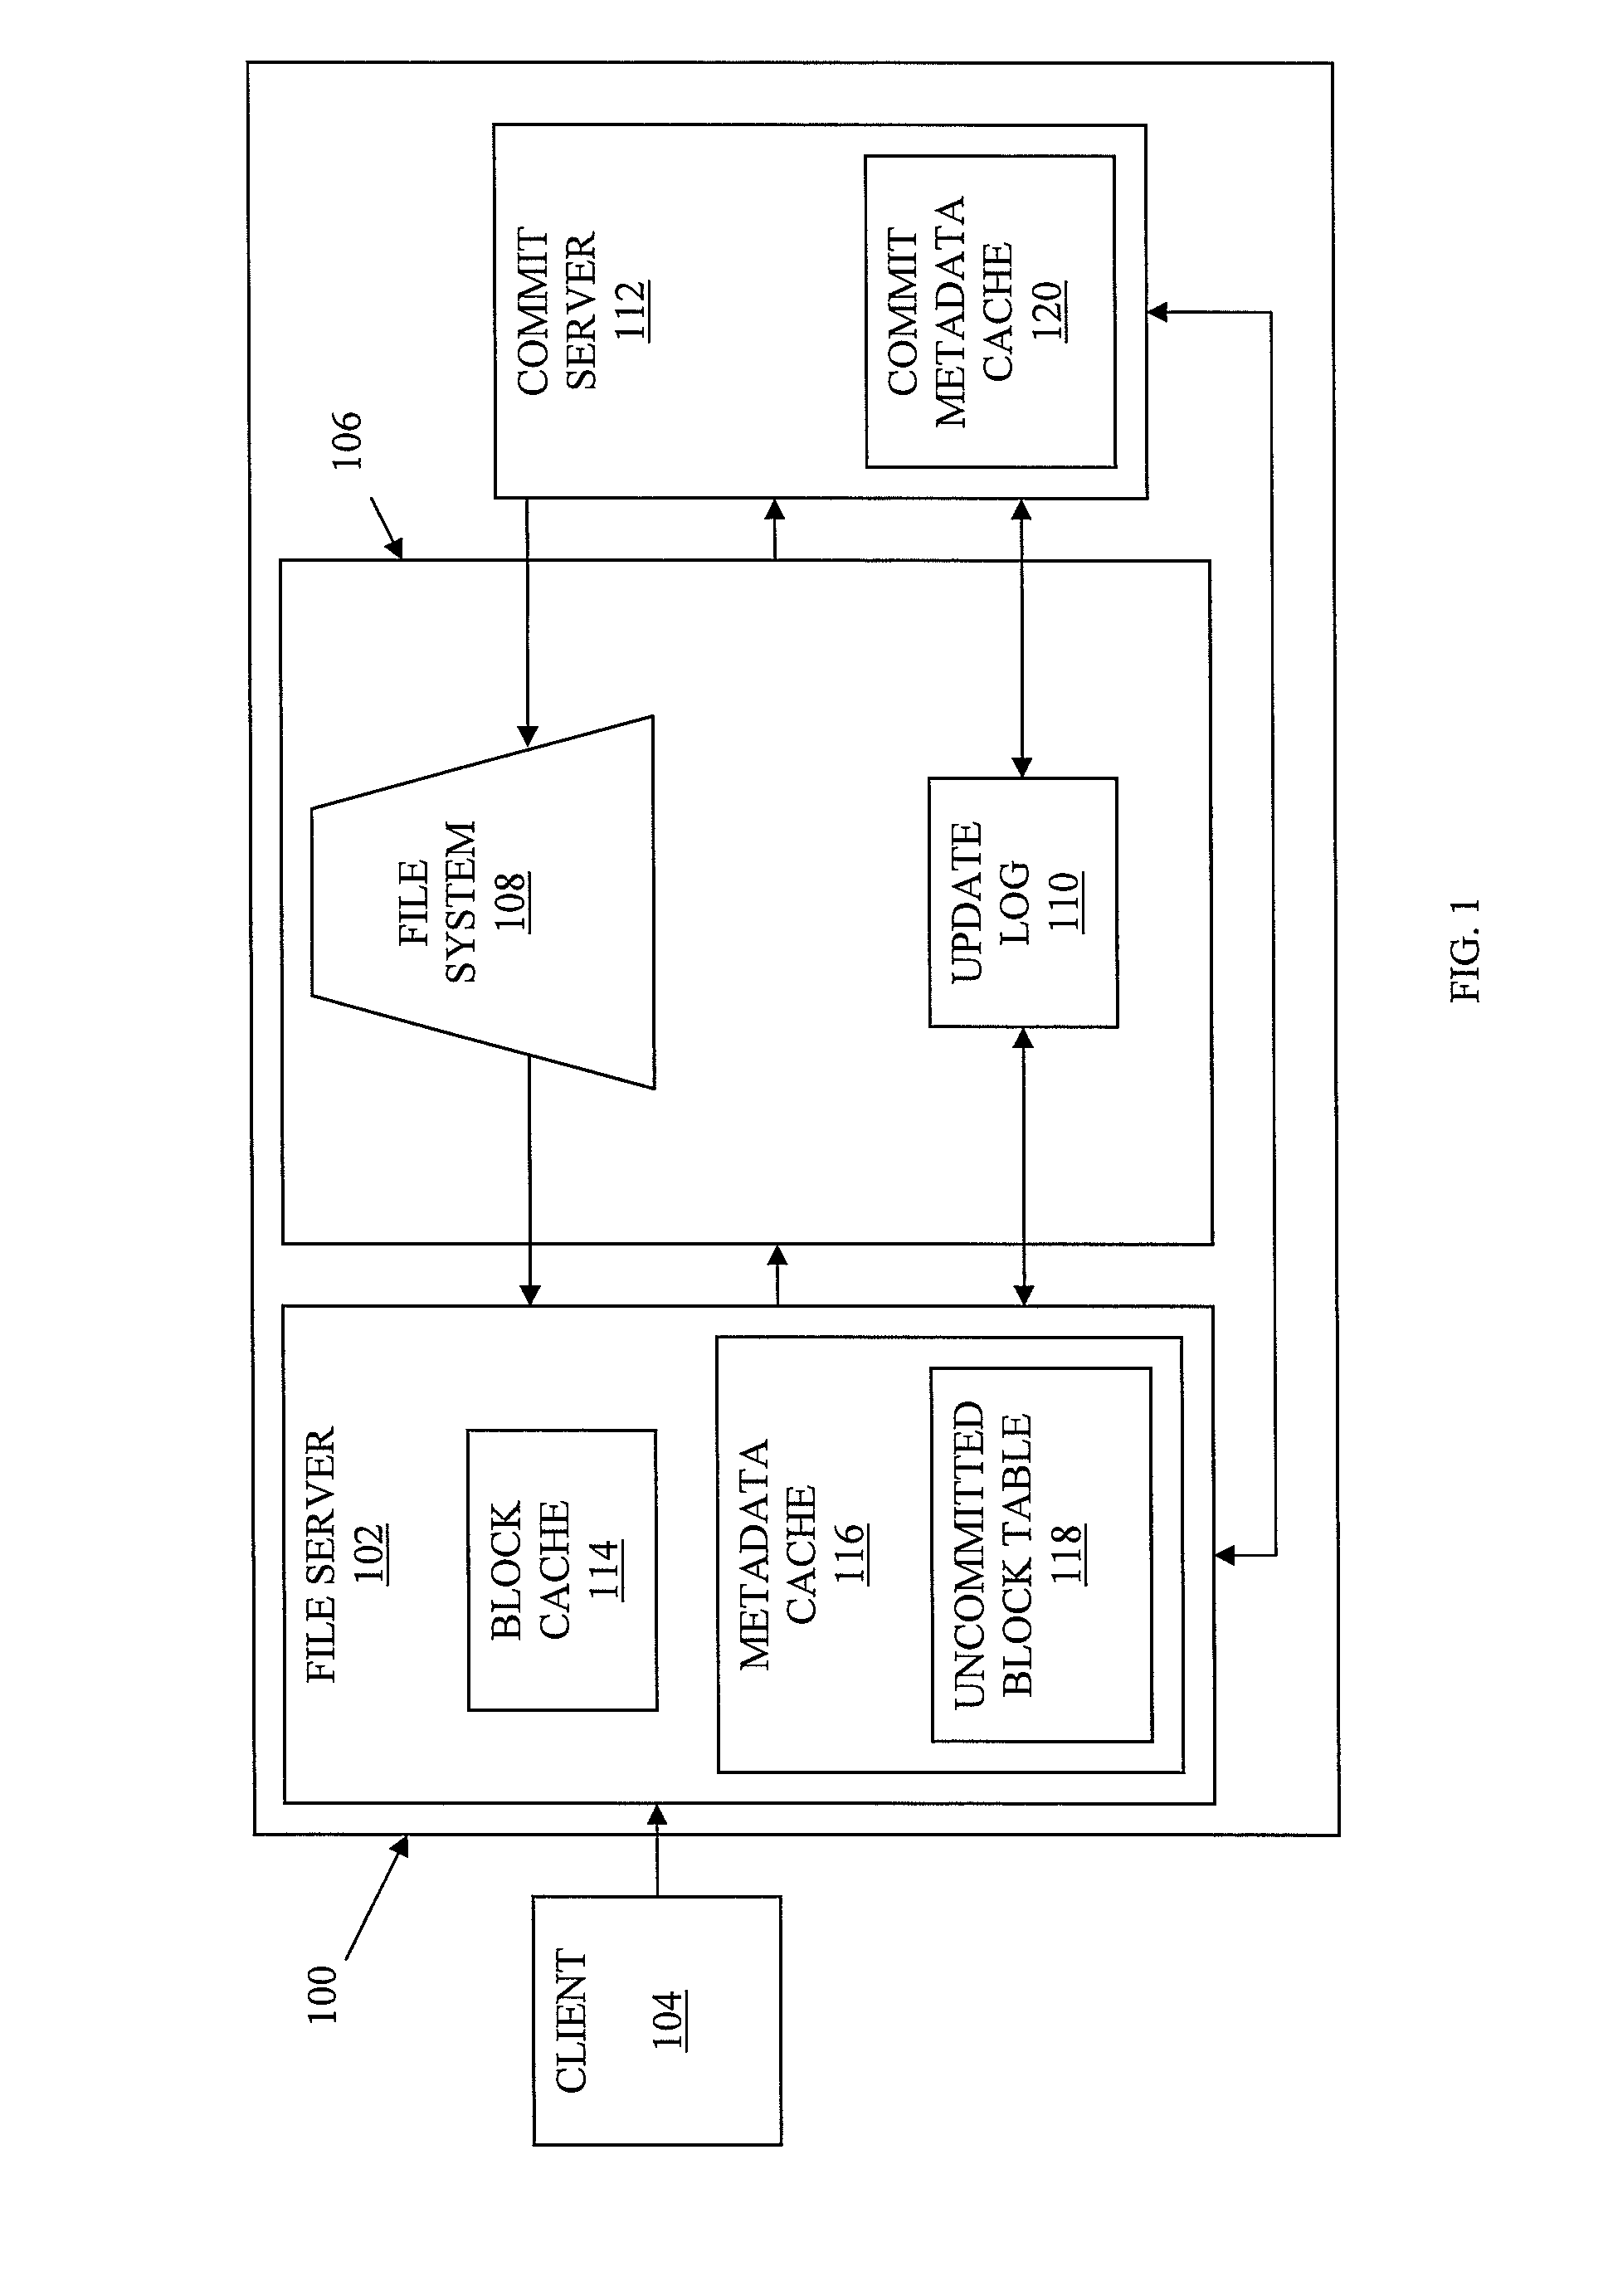 System and method for content addressable storage